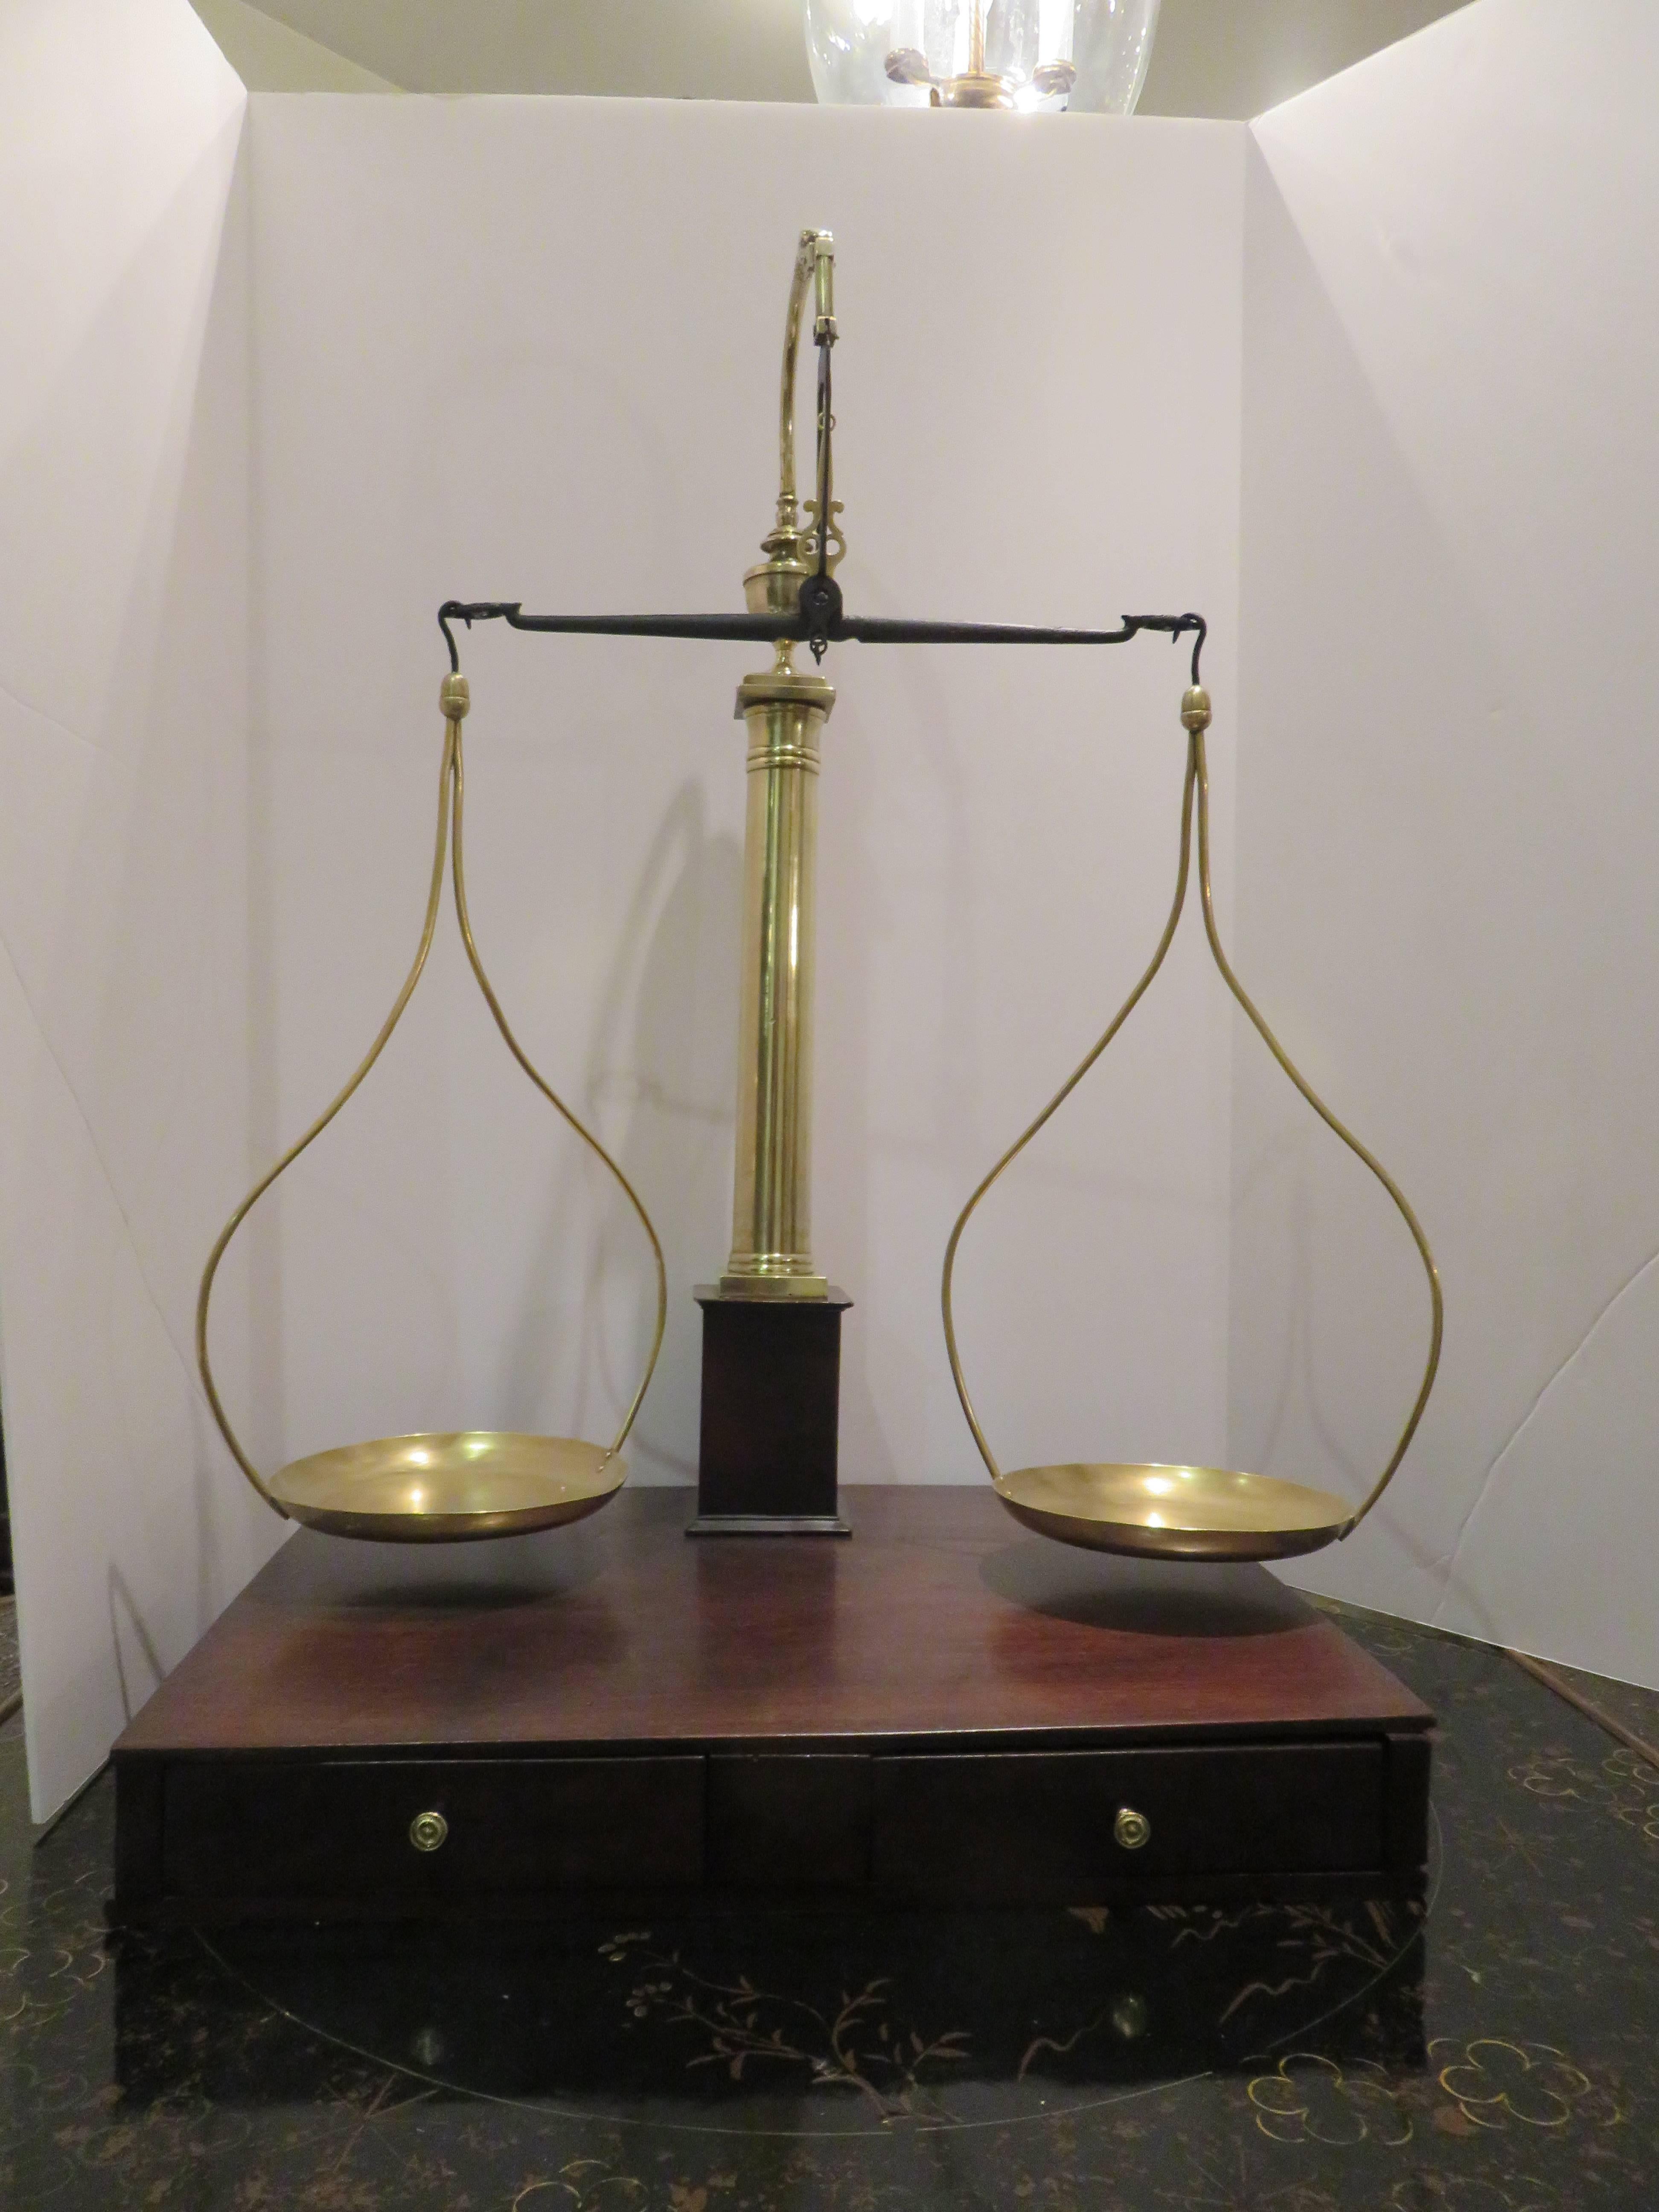 A French goose neck brass and mahogany apothecary scale. Two drawers with brass pulls, solid mahogany woods, lovely restored condition.